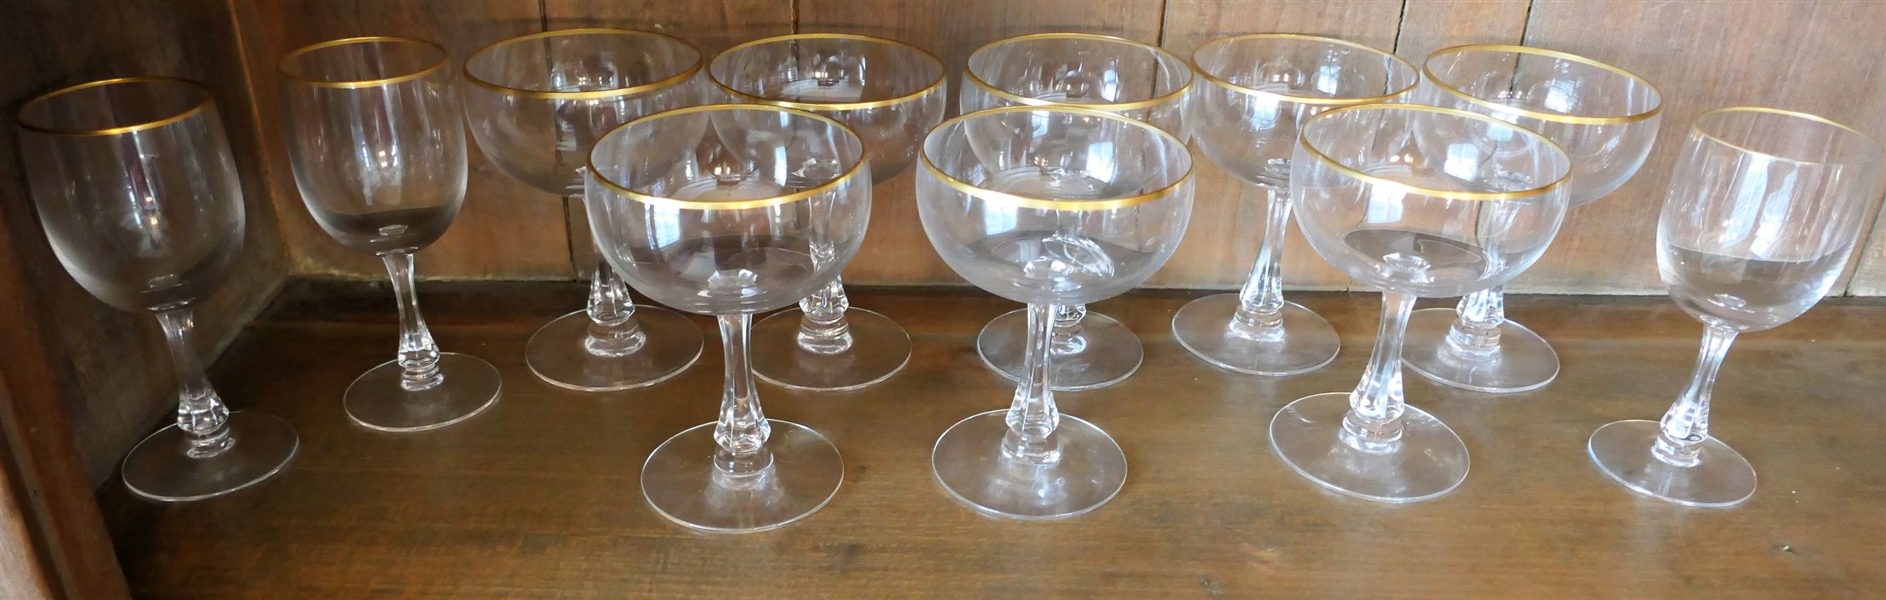 11 Signed Fostoria Gold Trimmed Glasses - 3 Small Wines and 8 4 3/8" Champagne Coupes